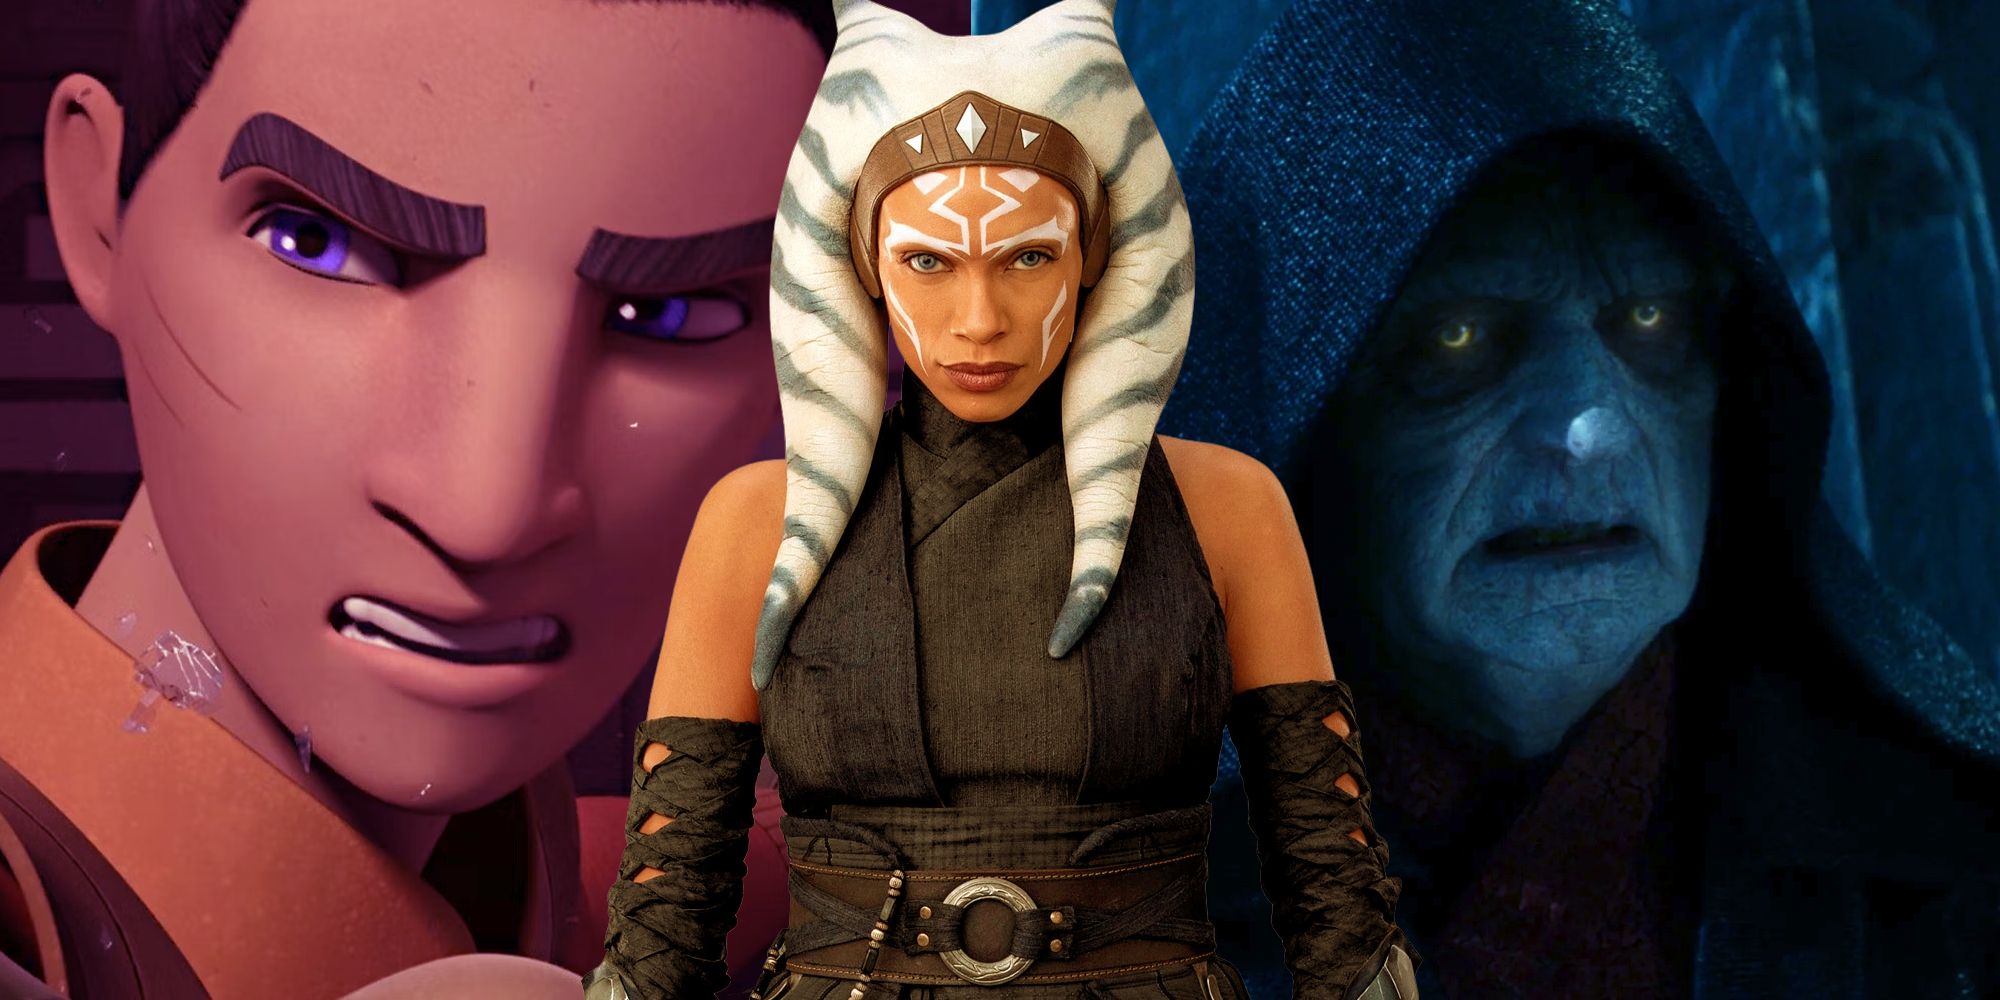 Split Image: Ezra Bridger uses the Force to protect his friends before disappearing into hyperspace; Ahsoka Tano (Rosario Dawson) gazes forward expectantly; Emperor Palpatine's eyes glow yellow in his resurrected form